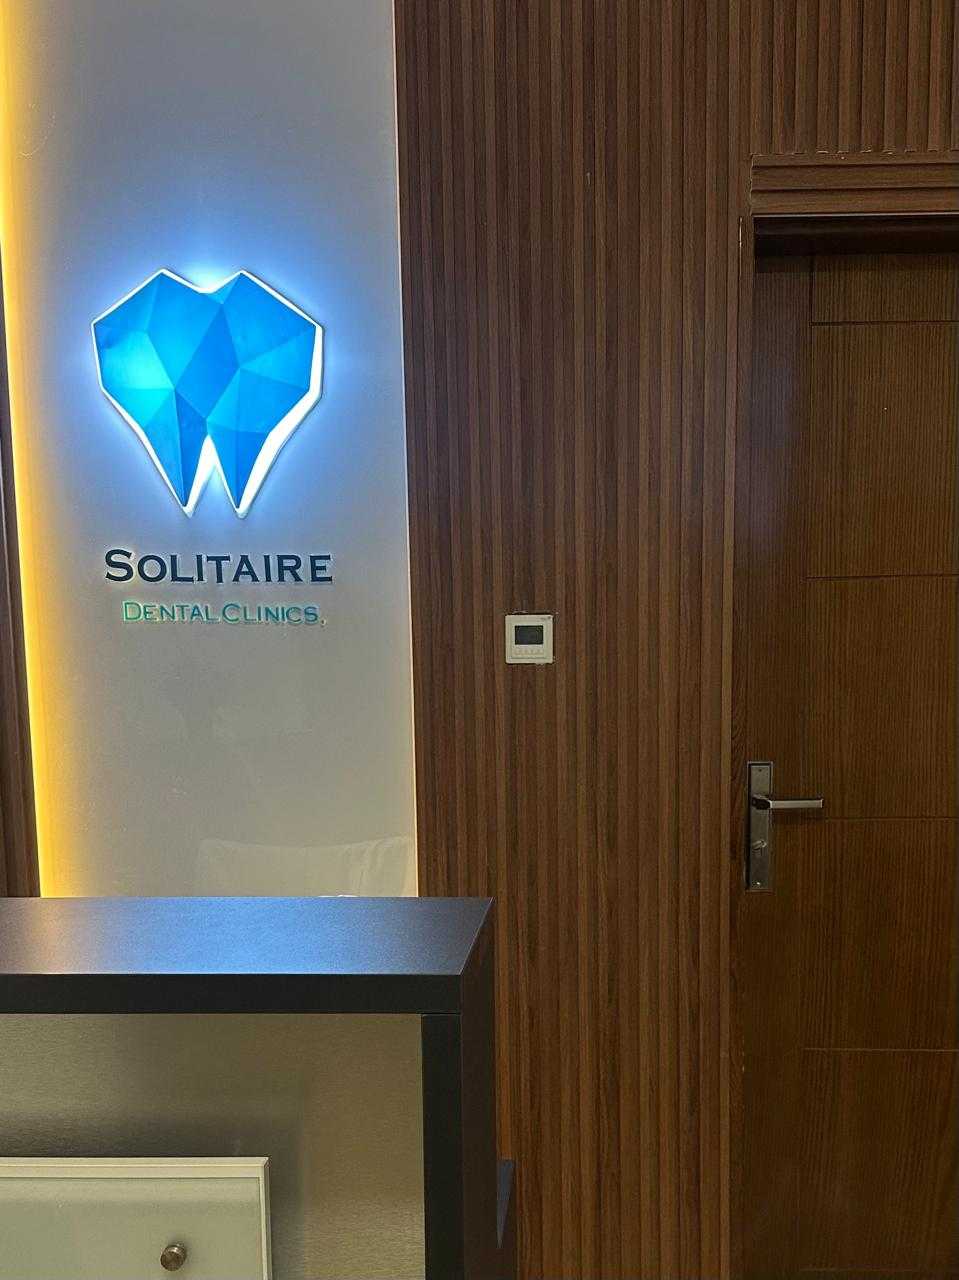 Solitaire Dental in Cairo Egypt